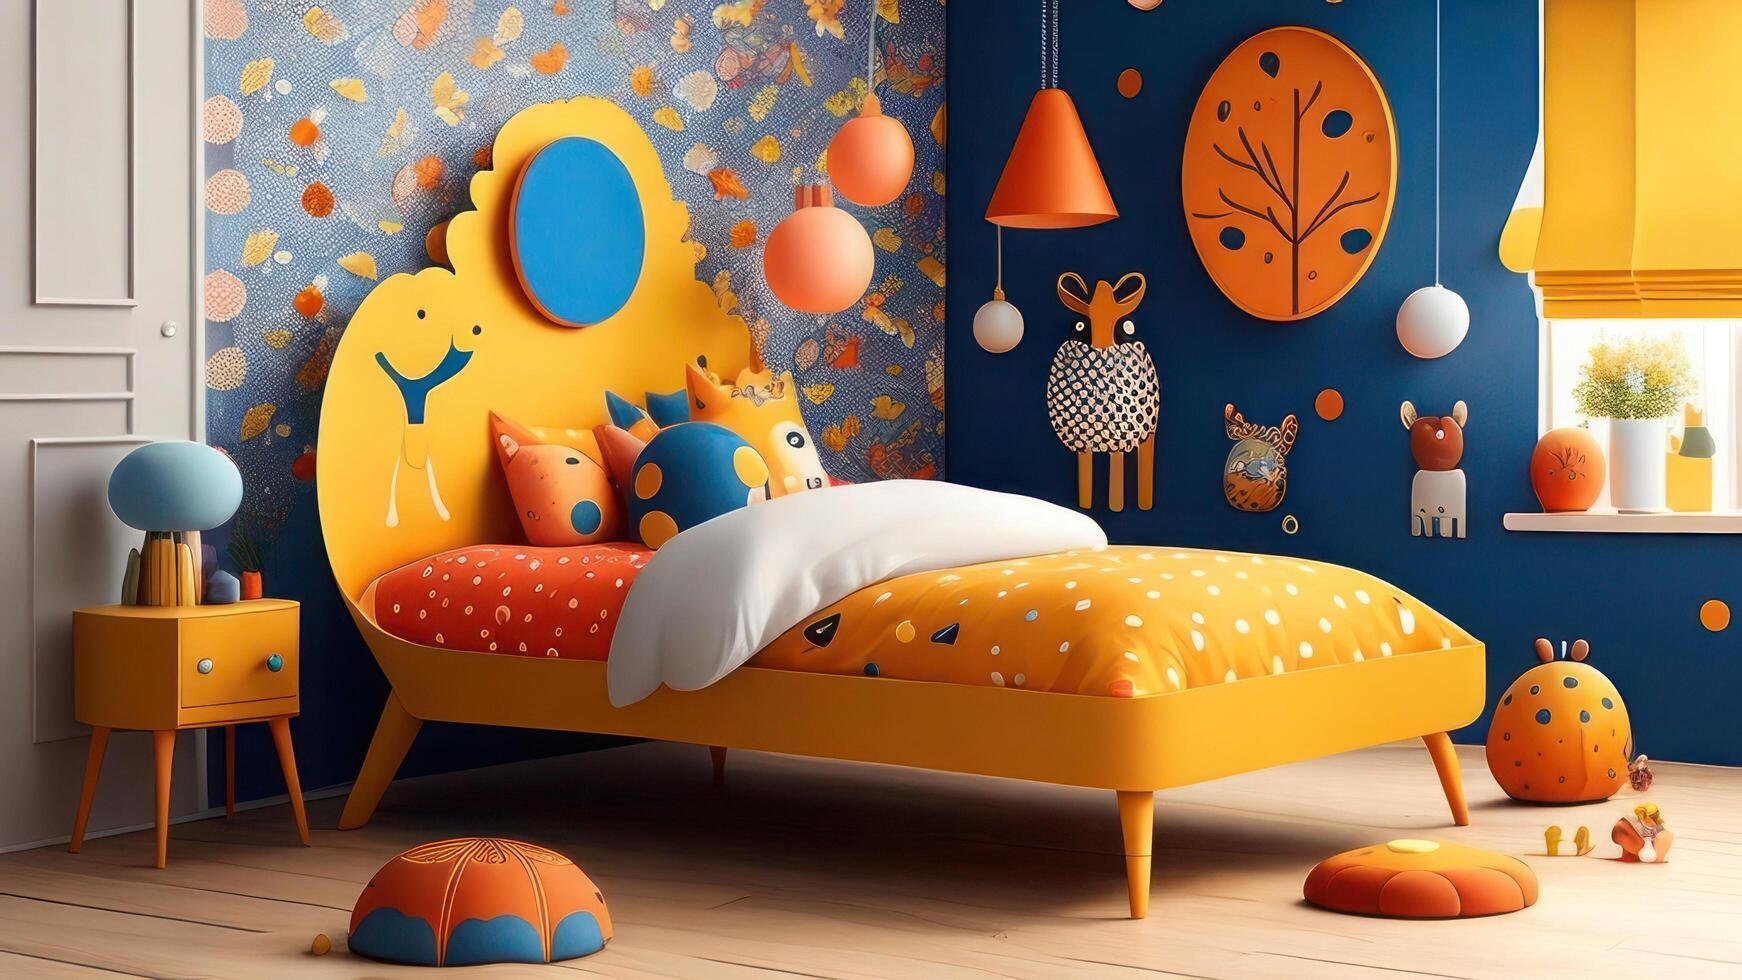 3d render of children's room with yellow bed and toys. photo